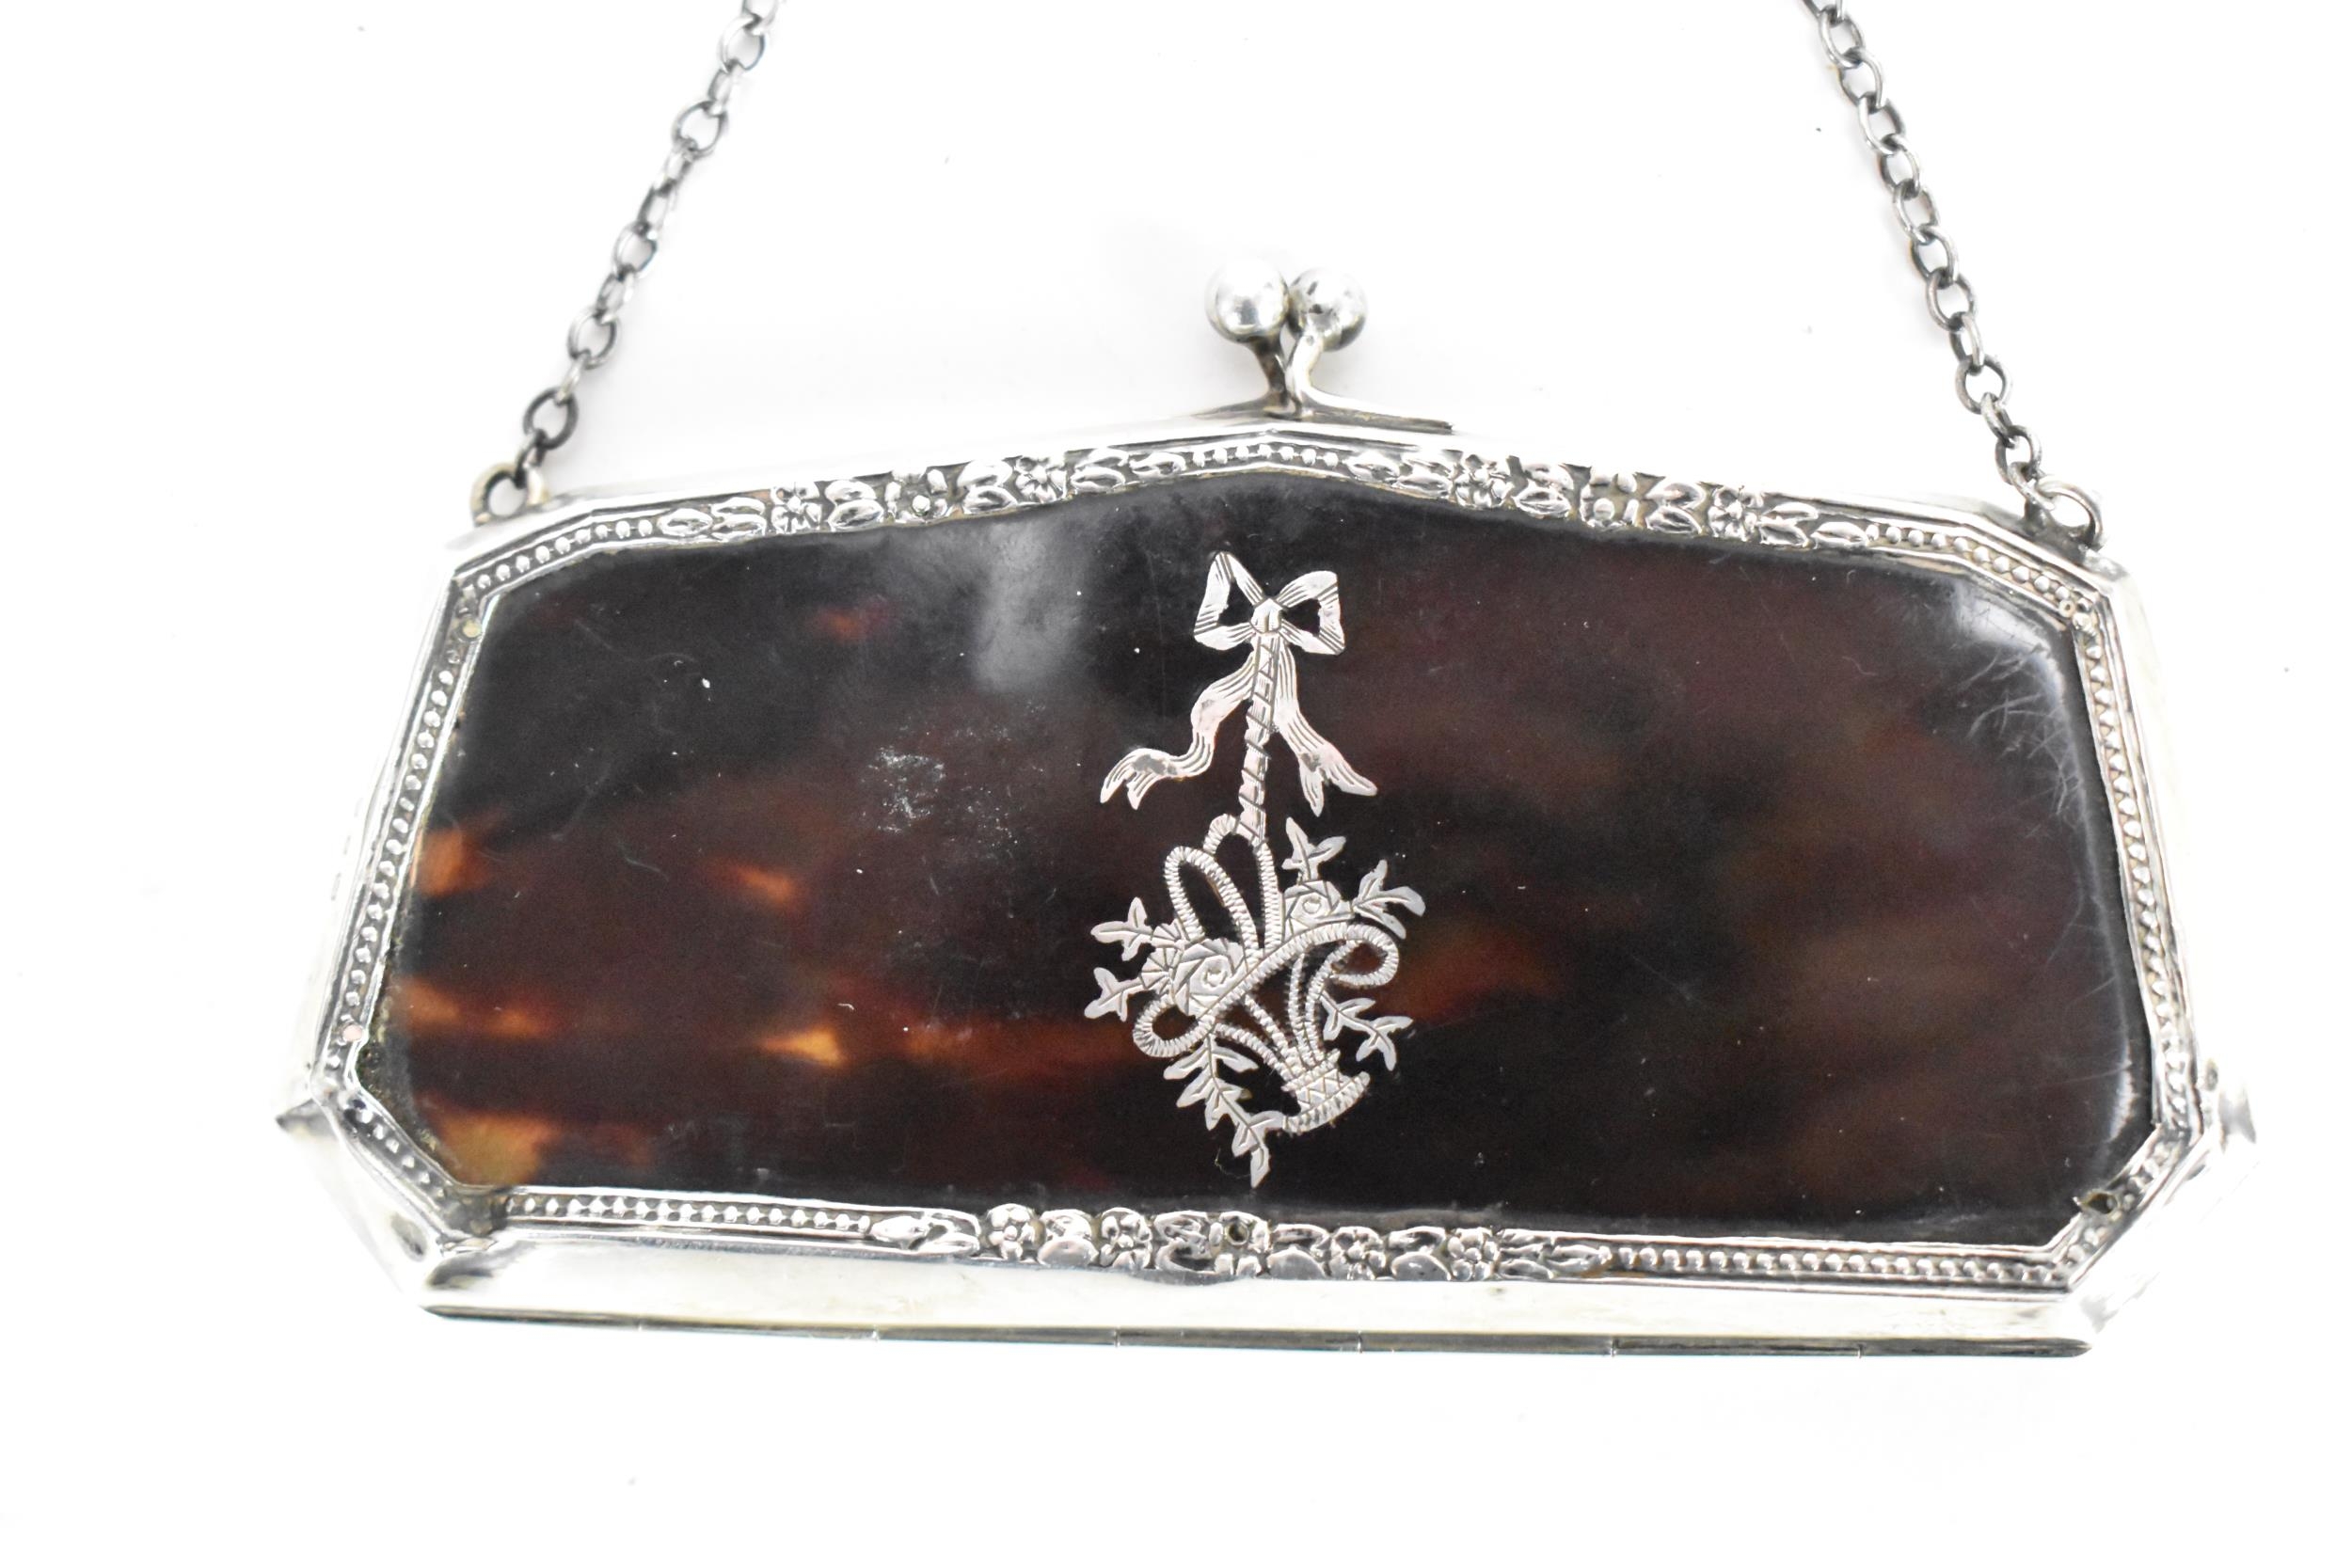 A George V tortoiseshell and silver purse, with suspension chain, Adams style silver inlaid - Image 4 of 8